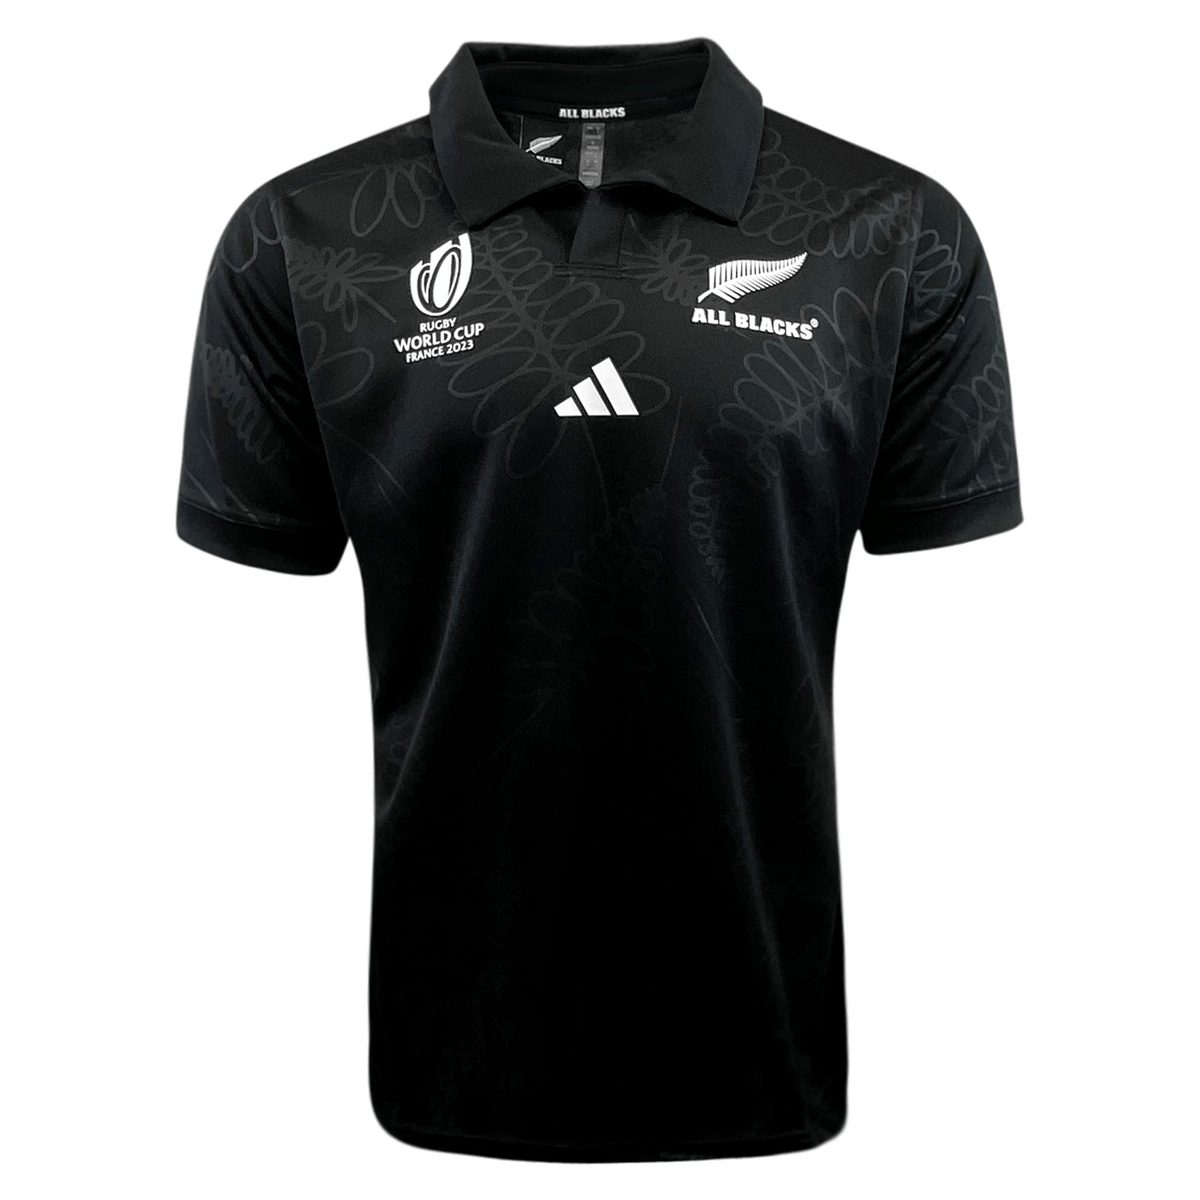 New Zealand All Blacks RWC 23 Home Supporter Jersey by adidas | World ...